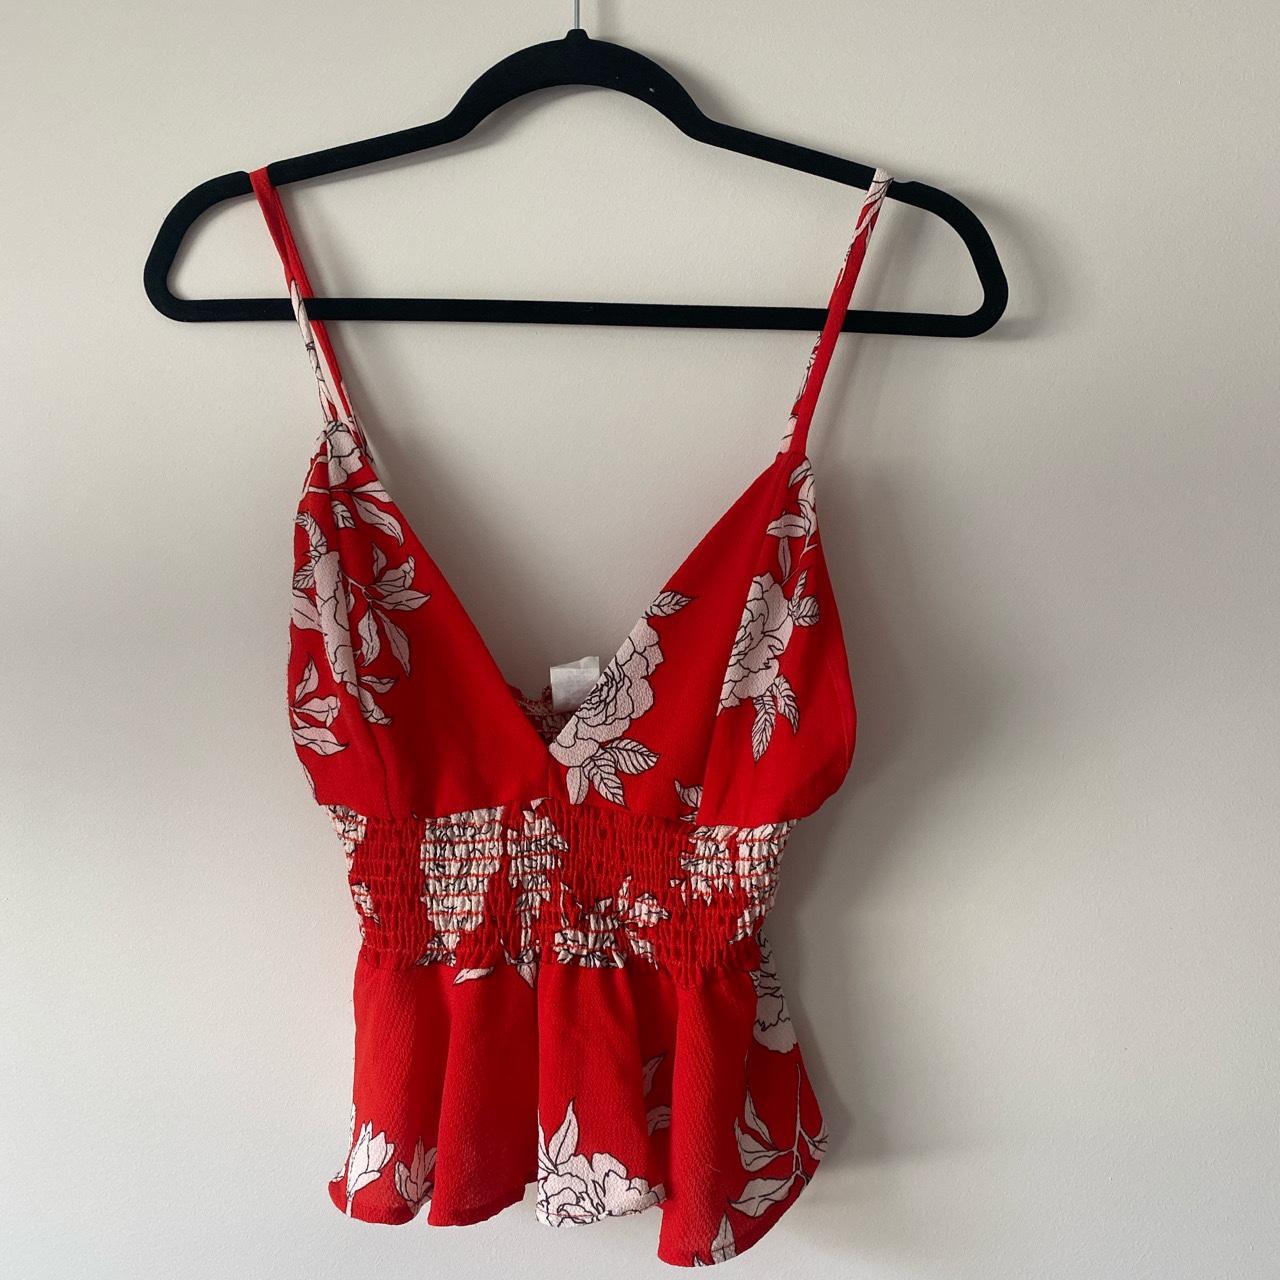 Women's White and Red Blouse | Depop